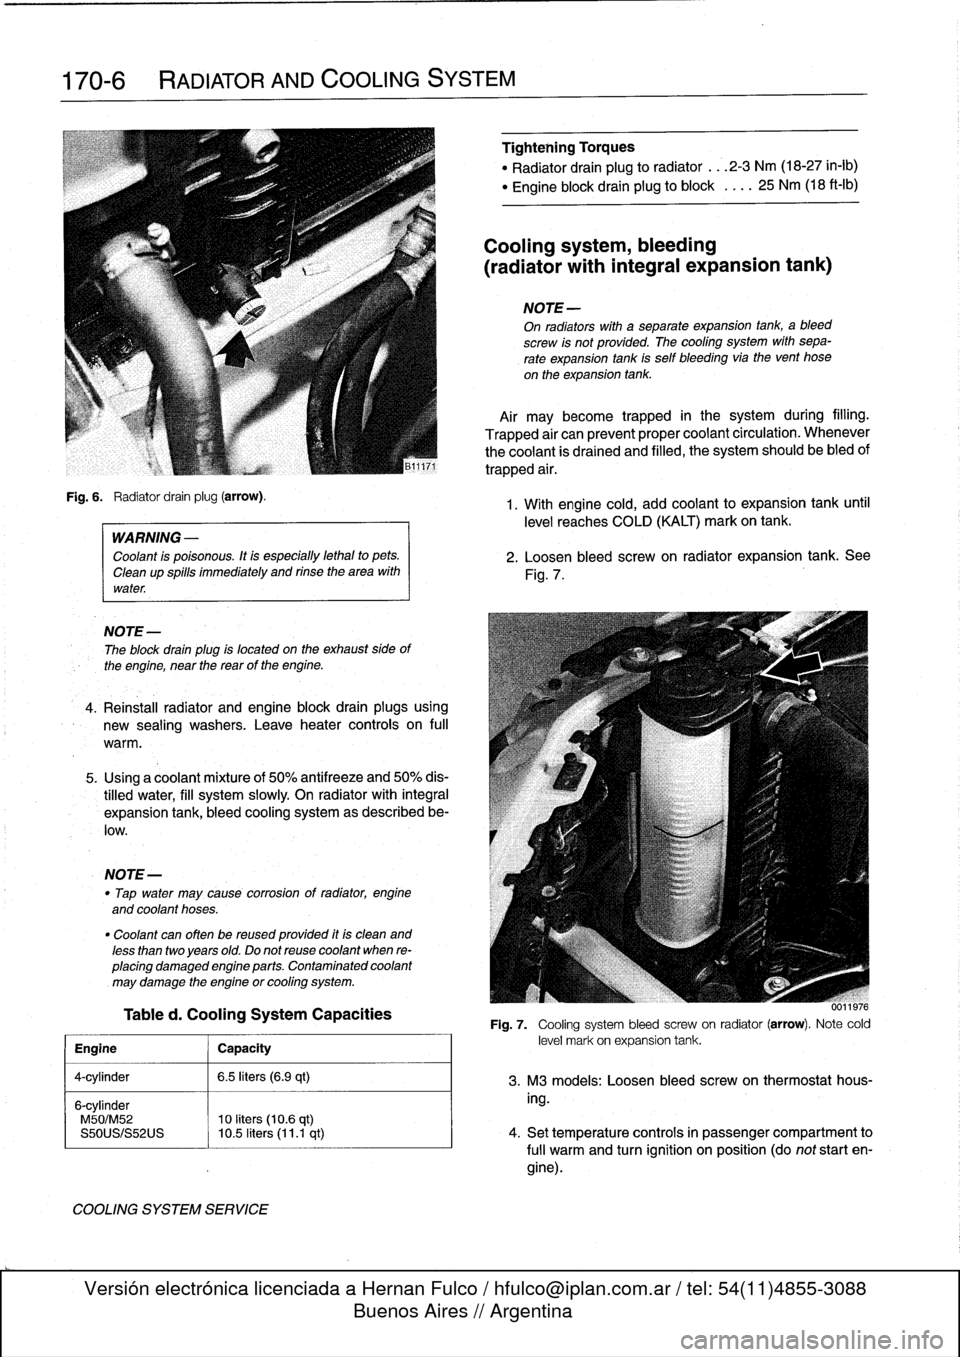 BMW 328i 1997 E36 Workshop Manual 
170-6

	

RADIATOR
AND
COOLING
SYSTEM

Fig
.
6
.

	

Radiator
drain
plug
(arrow)
.

WARNING
-

Coolant
is
poisonous
.
Itis
especially
lethal
to
pets
.

Cleanup
spills
immediately
and
rinse
the
area
w